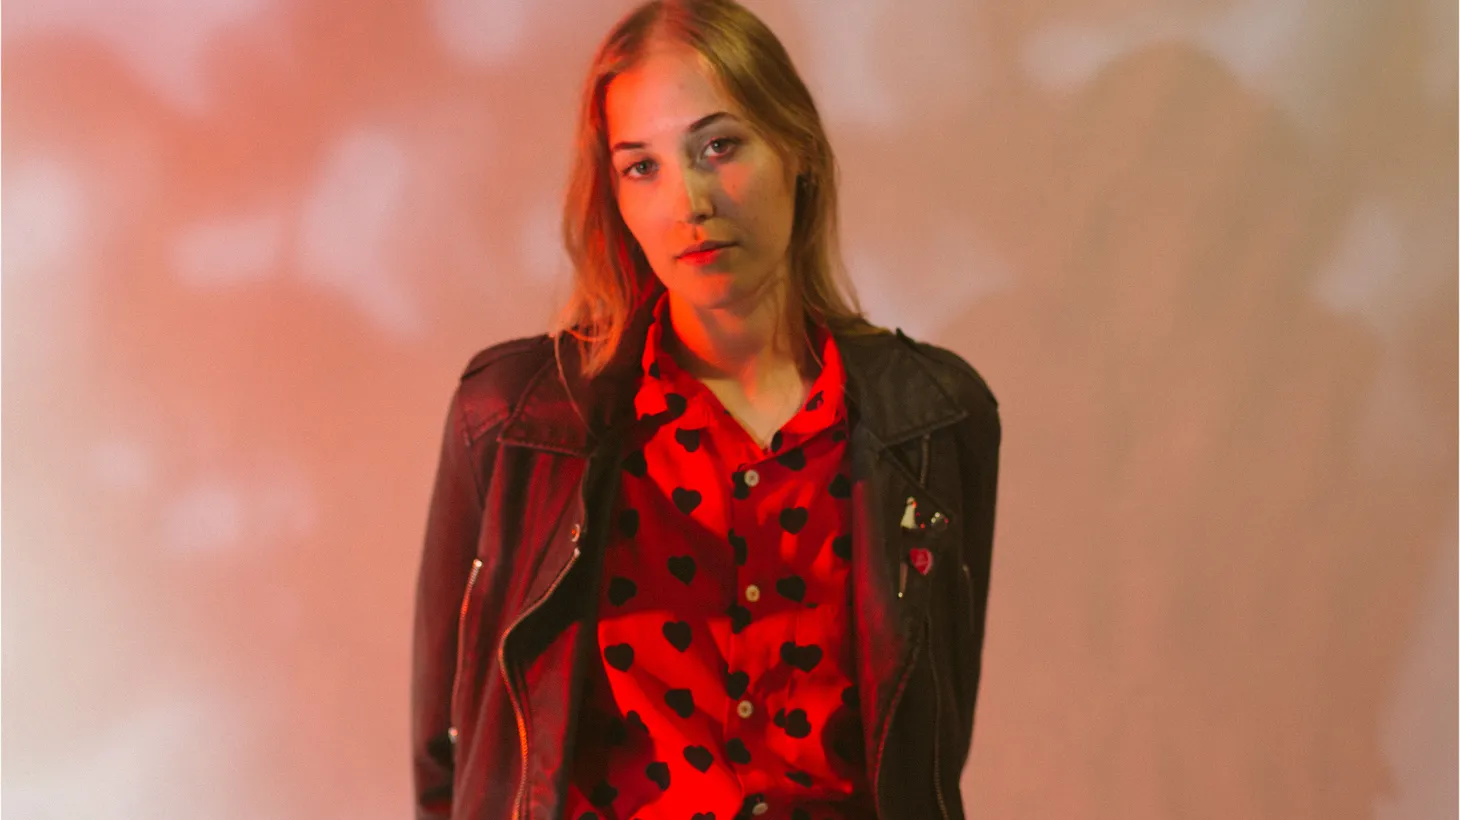 Aussie singer Hatchie has been dubbed the “dream pop idol of tomorrow” by Pitchfork. We see a bright future for this young artist and are happy to welcome her to our studio for her MBE debut.